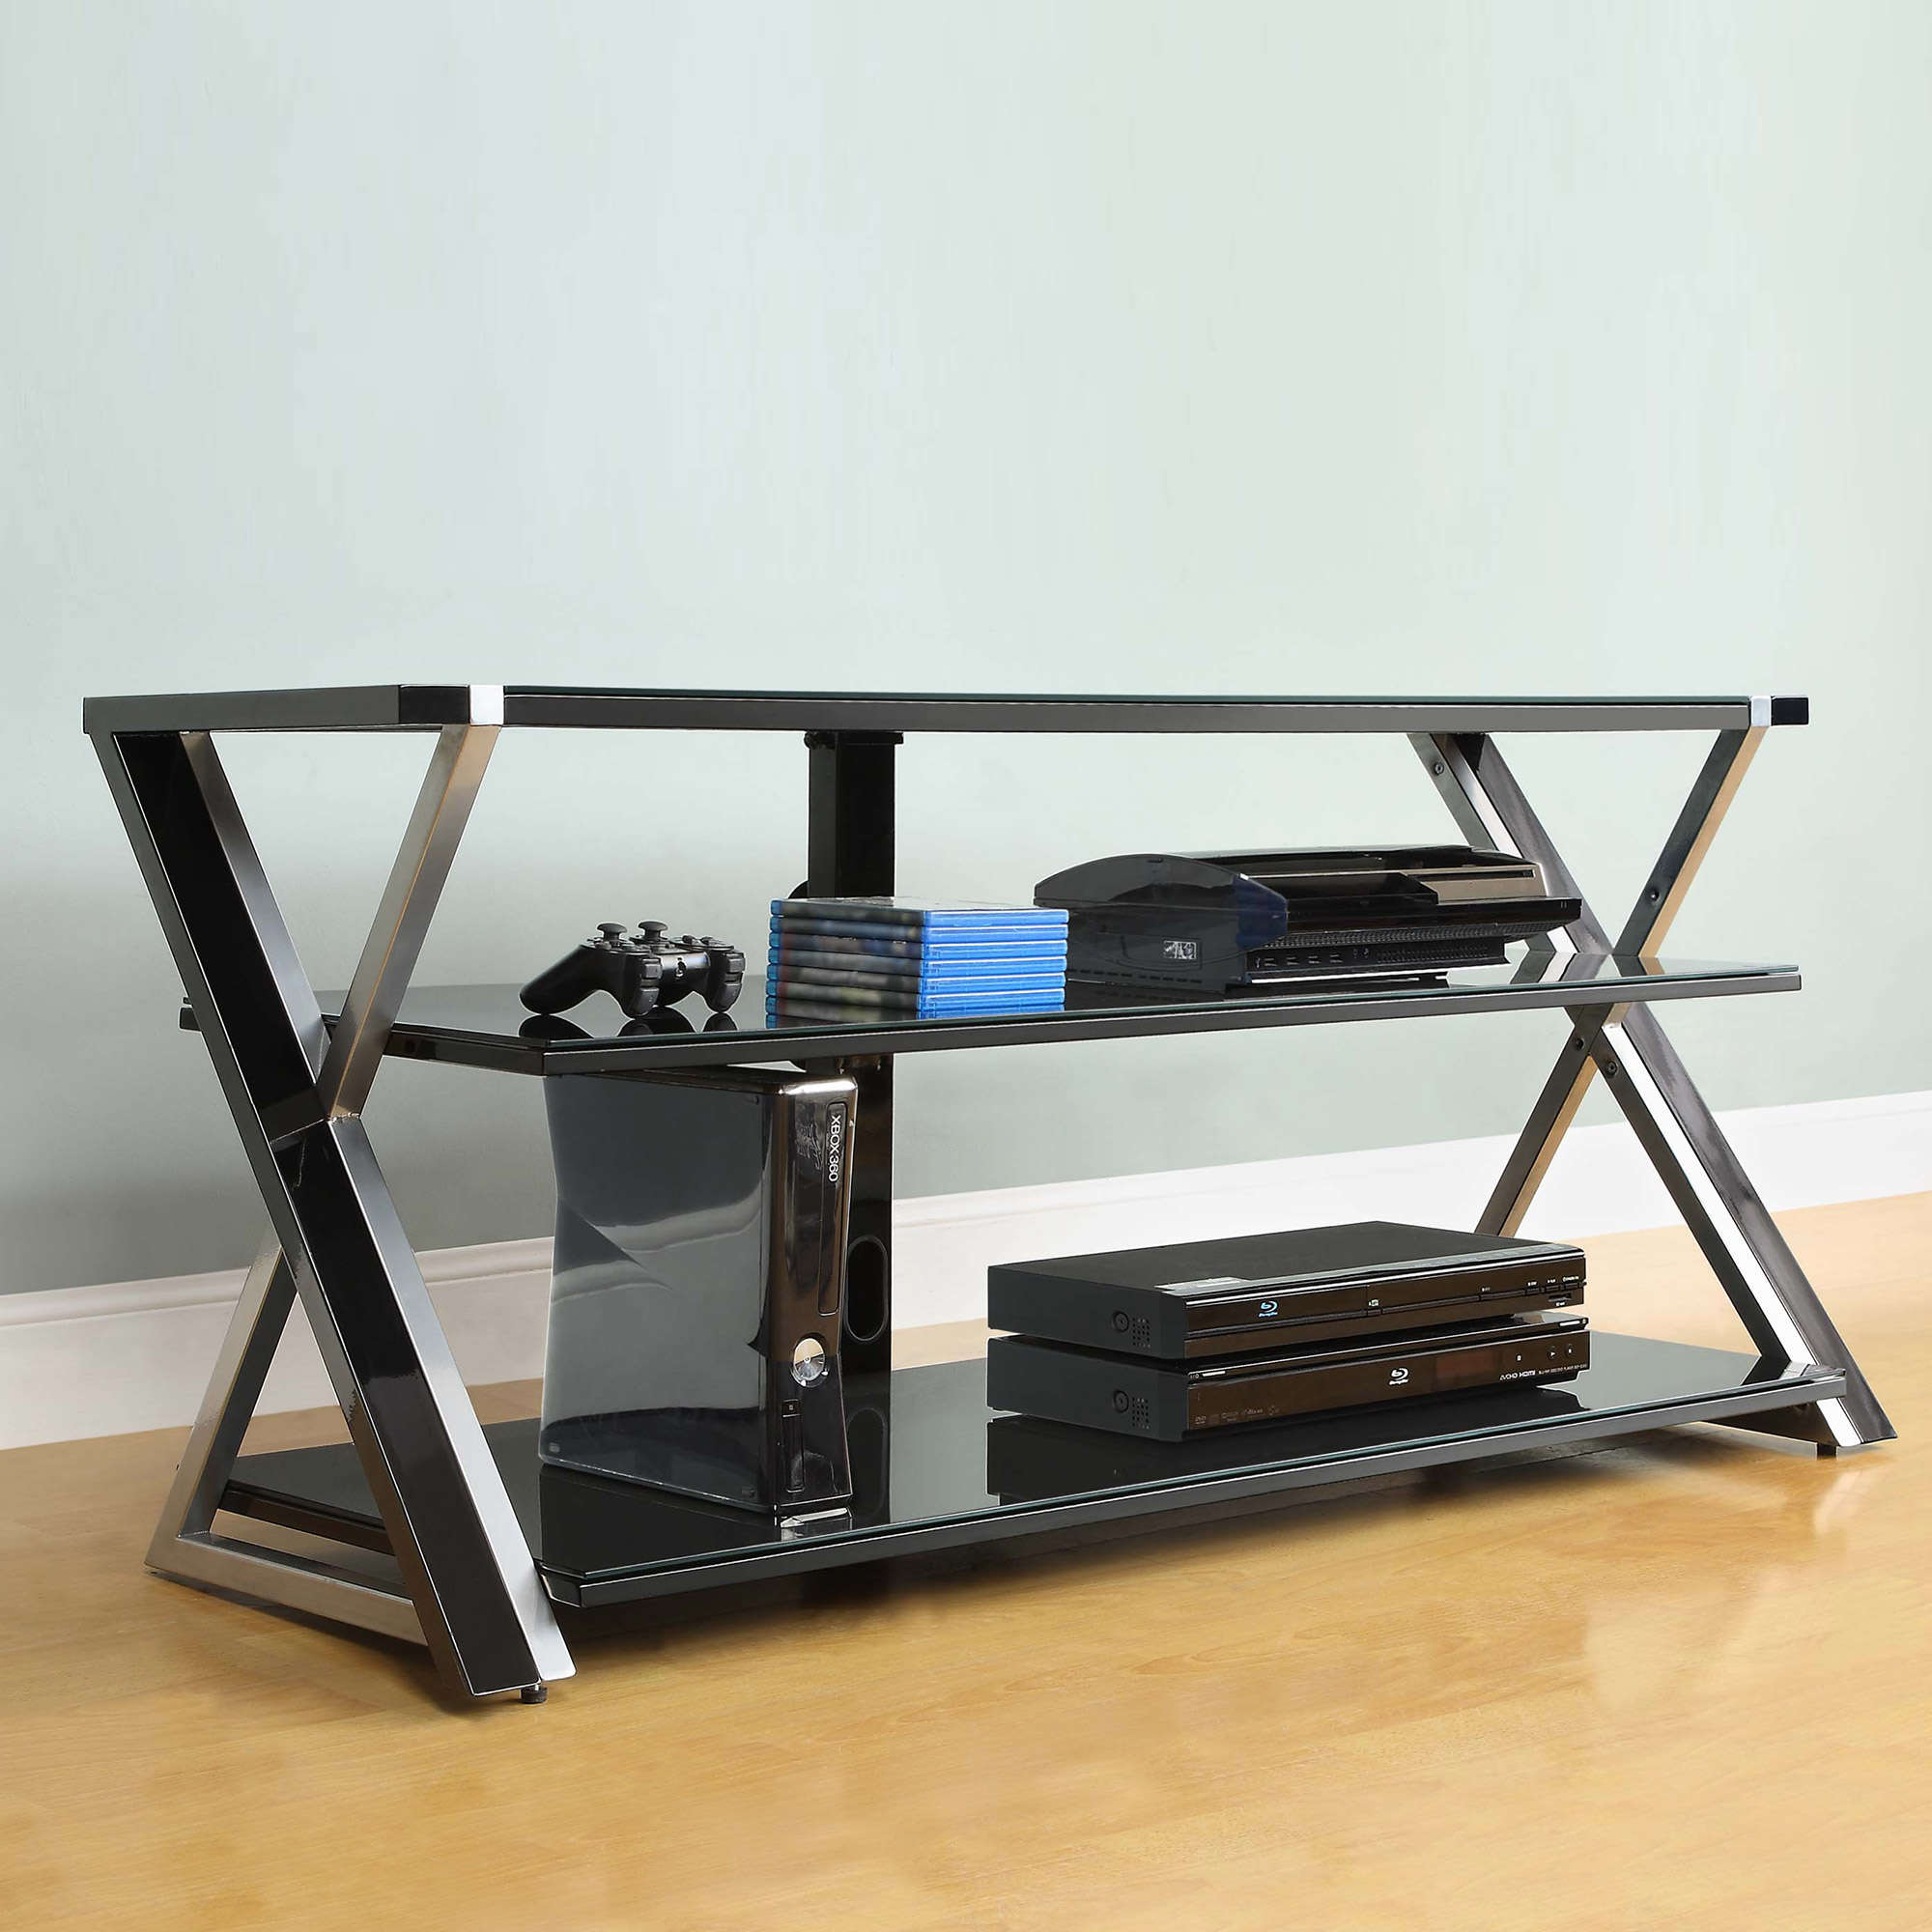 Whalen Furniture Black TV Stand for 60" Flat Panel TVs with Tempered Glass Shelves - image 2 of 4